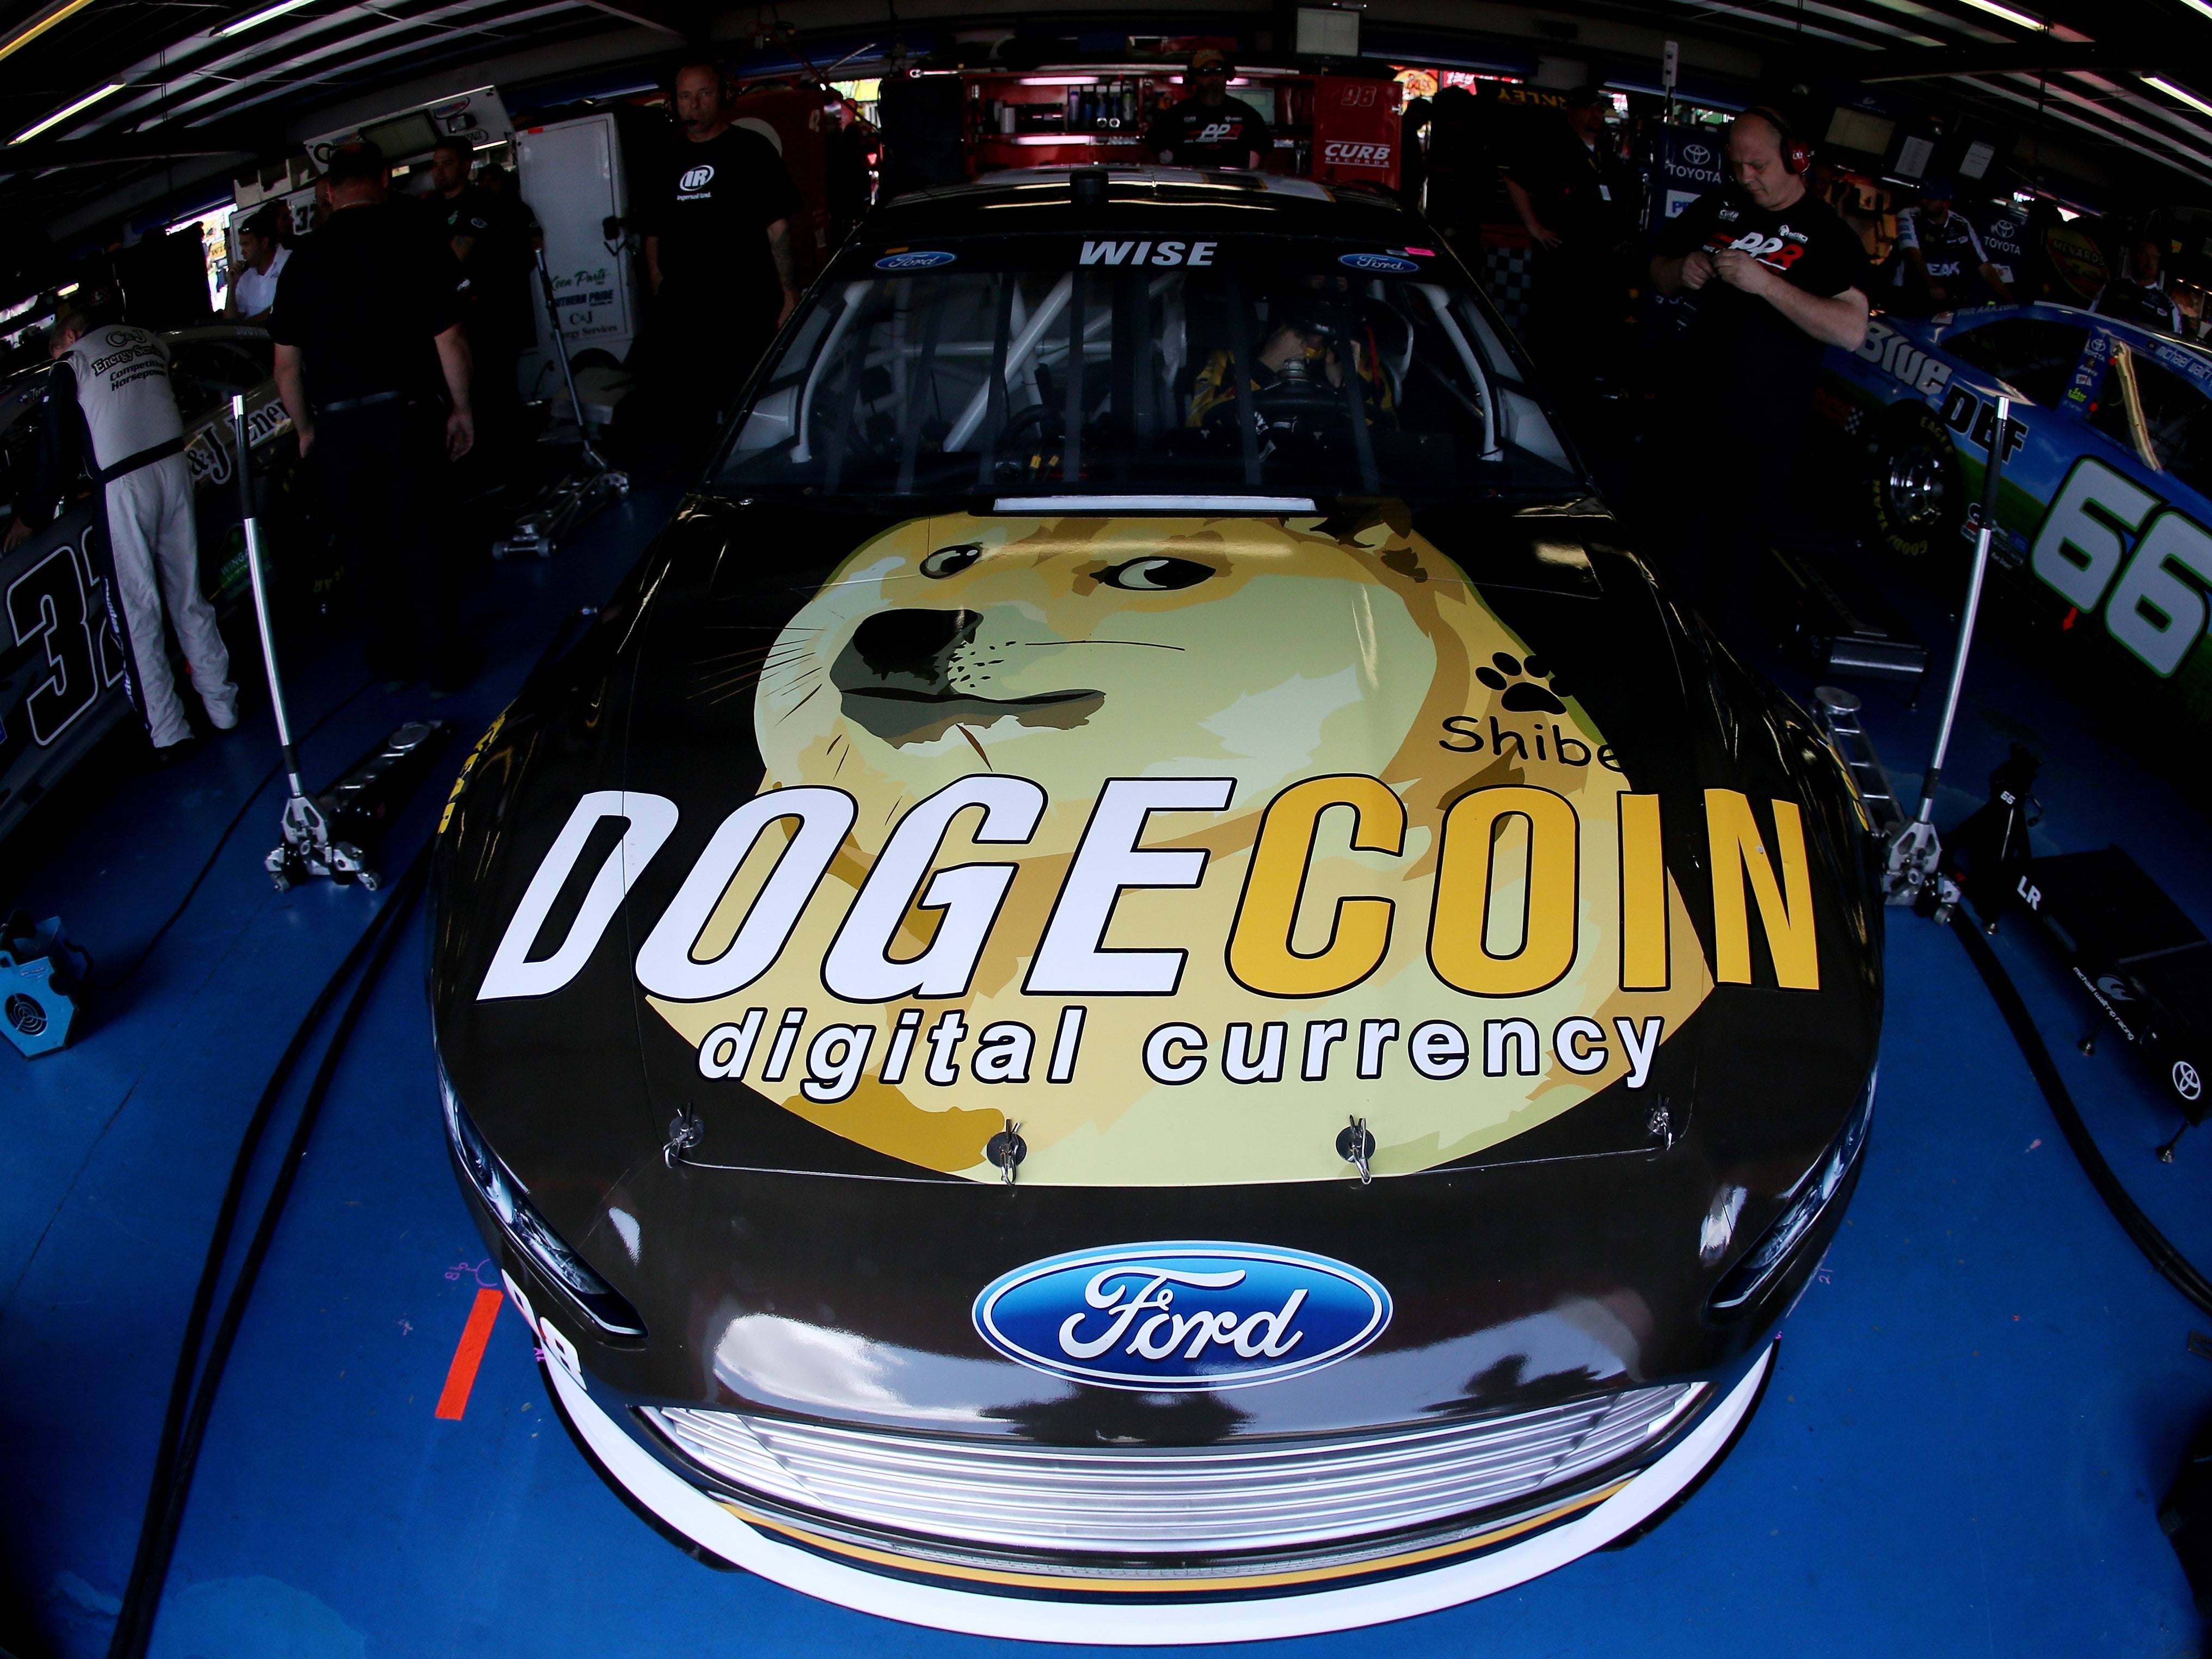 The Dogecoin Ford, driven by Josh Wise, in the garage during the Nascar Sprint Cup Series at Talladega Superspeedway on 2 May, 2014 in Talladega, Alabama